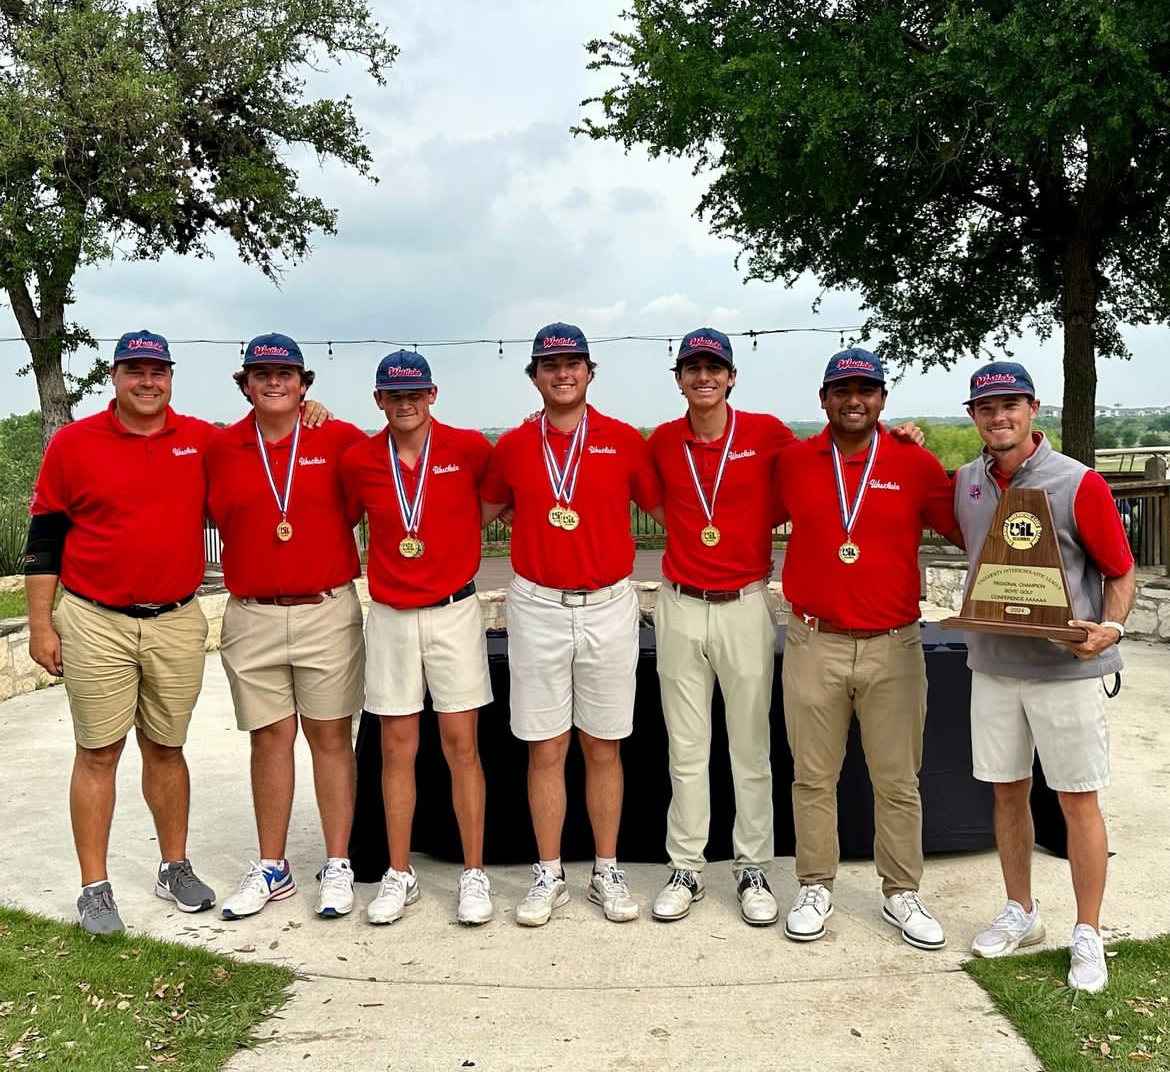 The+varsity+boys+golf+team+poses+for+a+photo+following+their+win+in+the+regional+championship+Wednesday%2C+April+17.+The+Chaps+will+go+for+a+seventh+consecutive+state+title+in+the+state+tournament+the+week+of+April+29.+